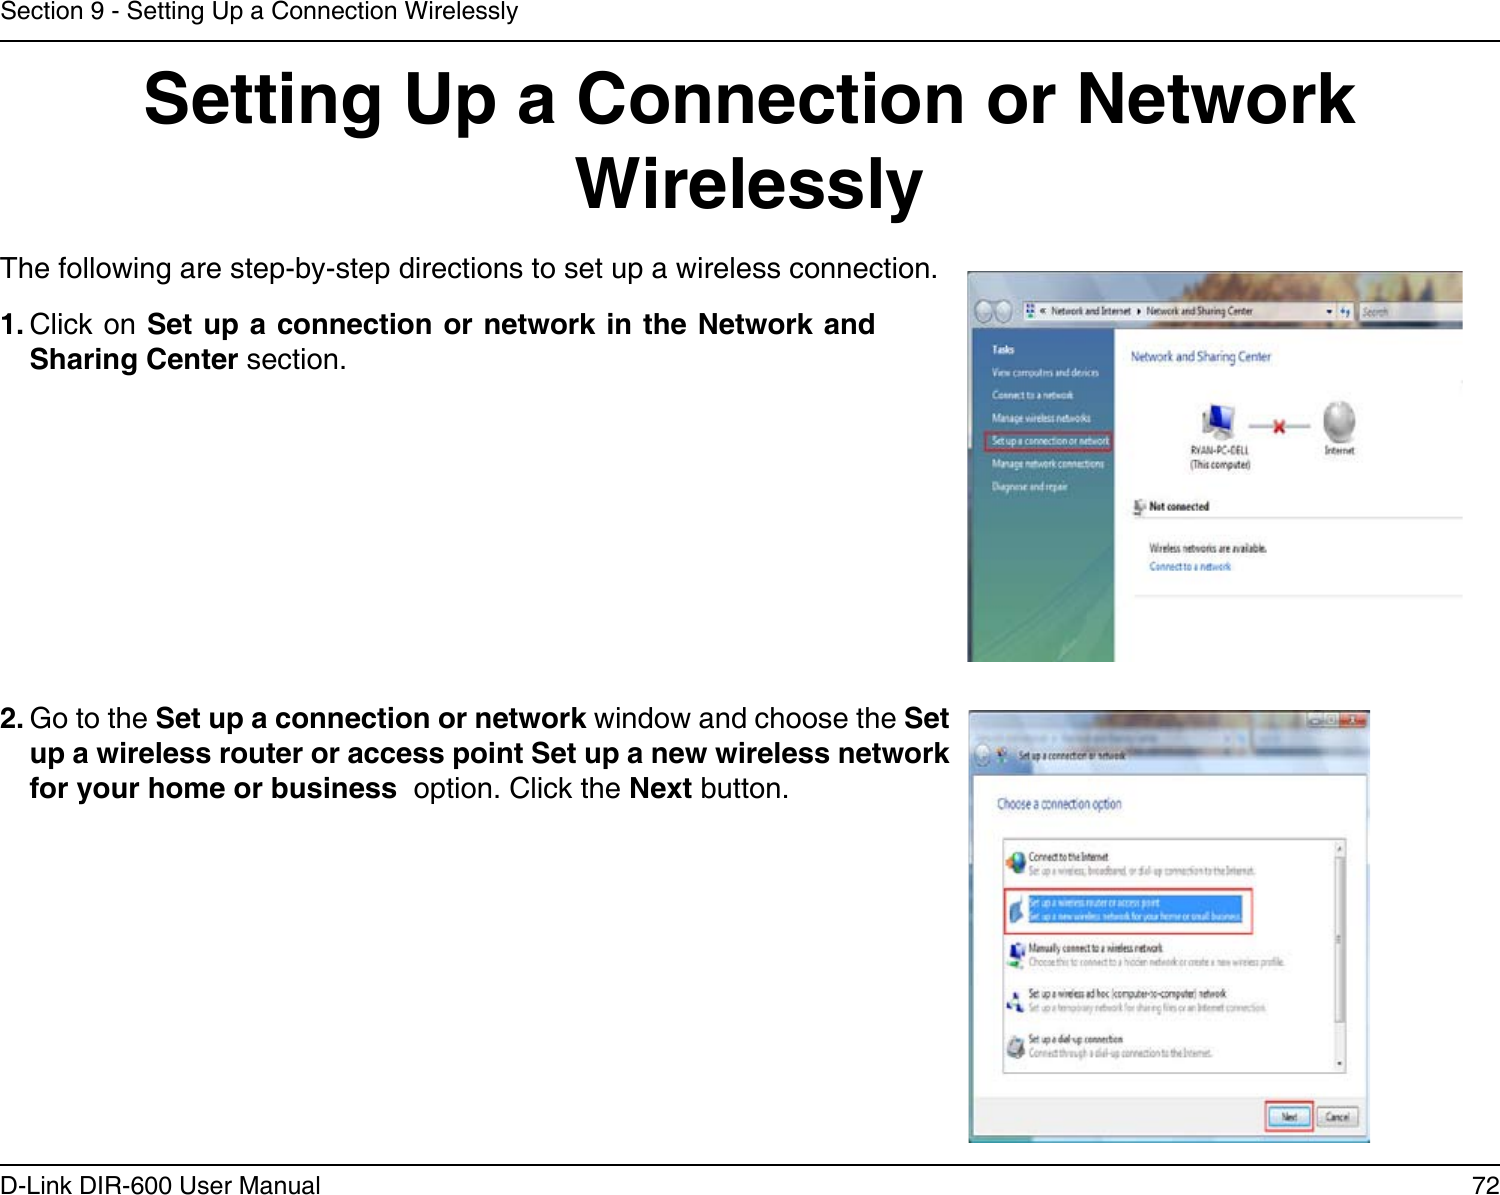 72D-Link DIR-600 User ManualSection 9 - Setting Up a Connection WirelesslySetting Up a Connection or Network WirelesslyThe following are step-by-step directions to set up a wireless connection.2. Go to the Set up a connection or network window and choose the Set up a wireless router or access point Set up a new wireless network for your home or business  option. Click the Next button. 1. Click on Set up a connection or network in the Network and Sharing Center section. 